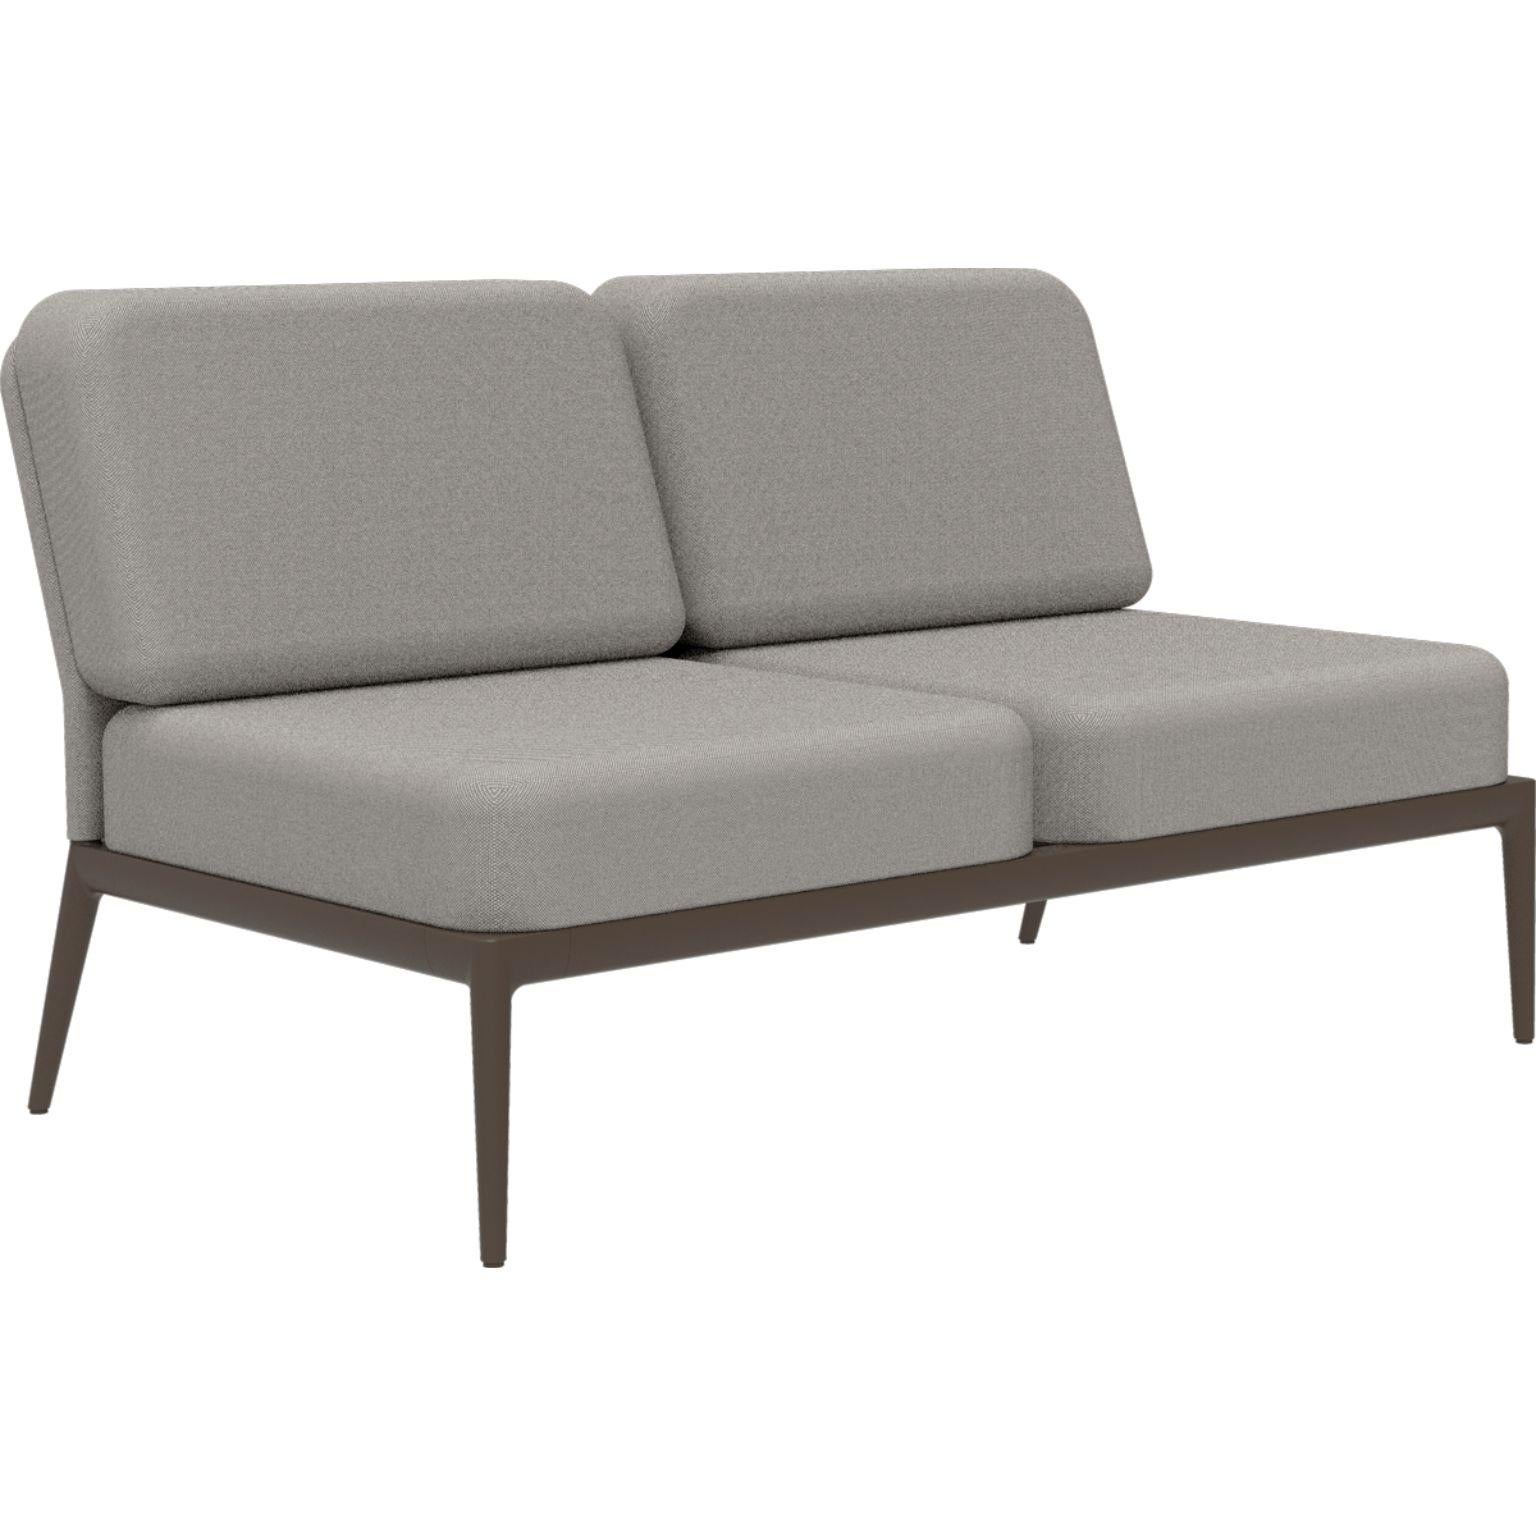 Cover bronze double central sofá by MOWEE
Dimensions: D 83 x W 136 x H 81 cm
Material: Aluminium, Upholstery 
Weight: 27 kg
Also available in different colours and finishes.

An unmistakable collection for its beauty and robustness. A tribute